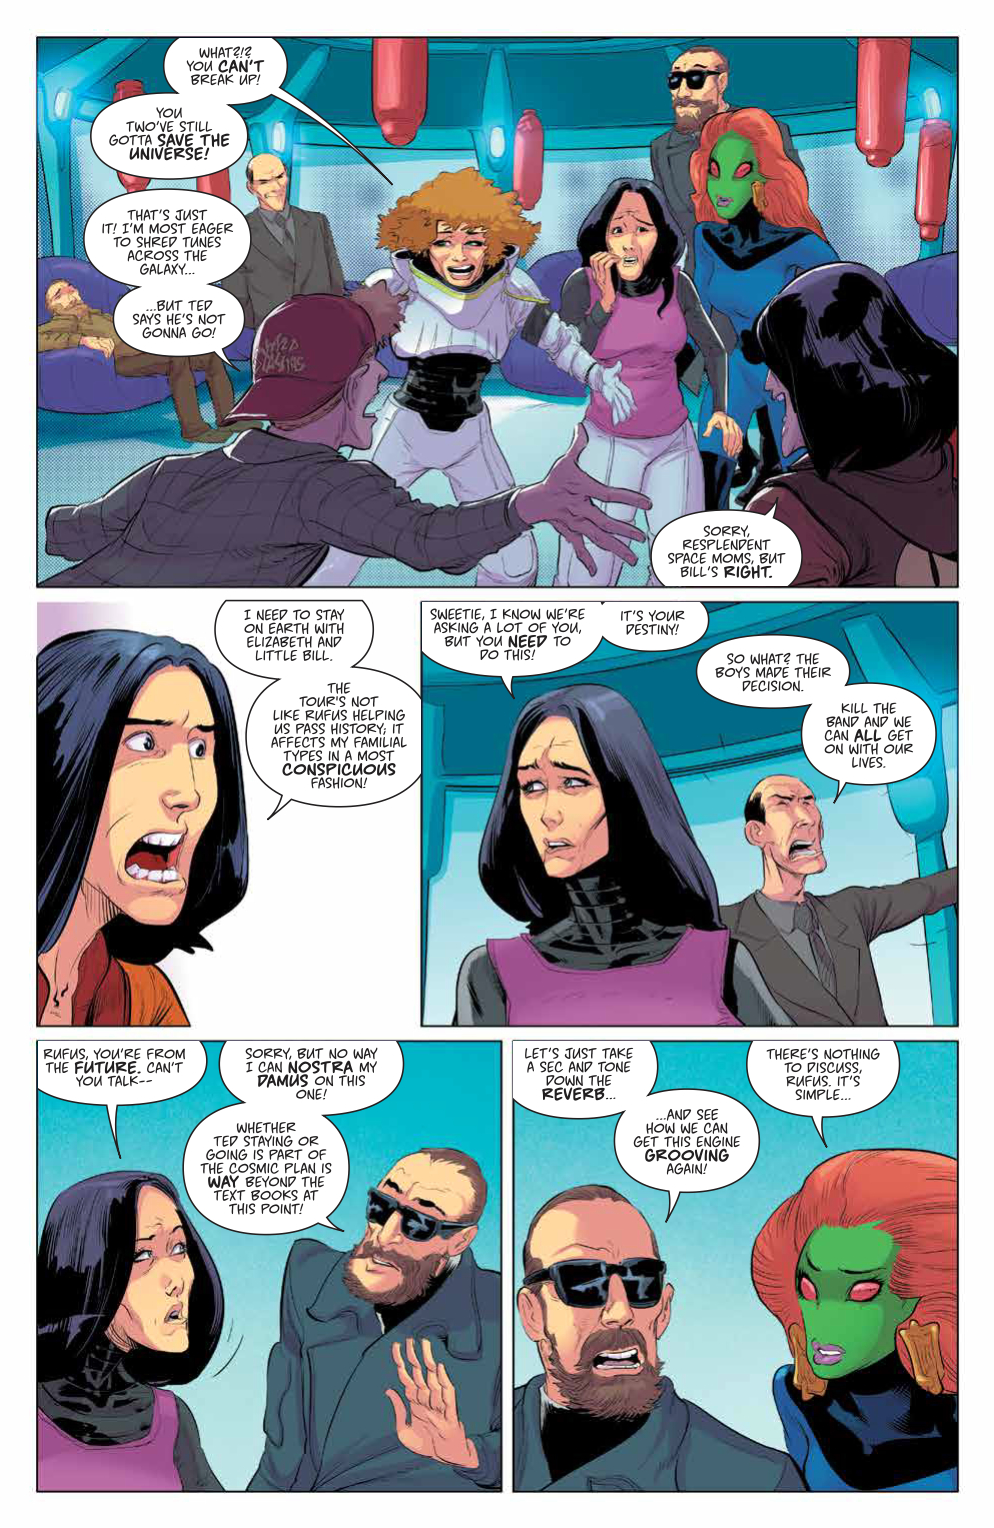 Bill _Ted_Save_the_Universe_004_PRESS_4